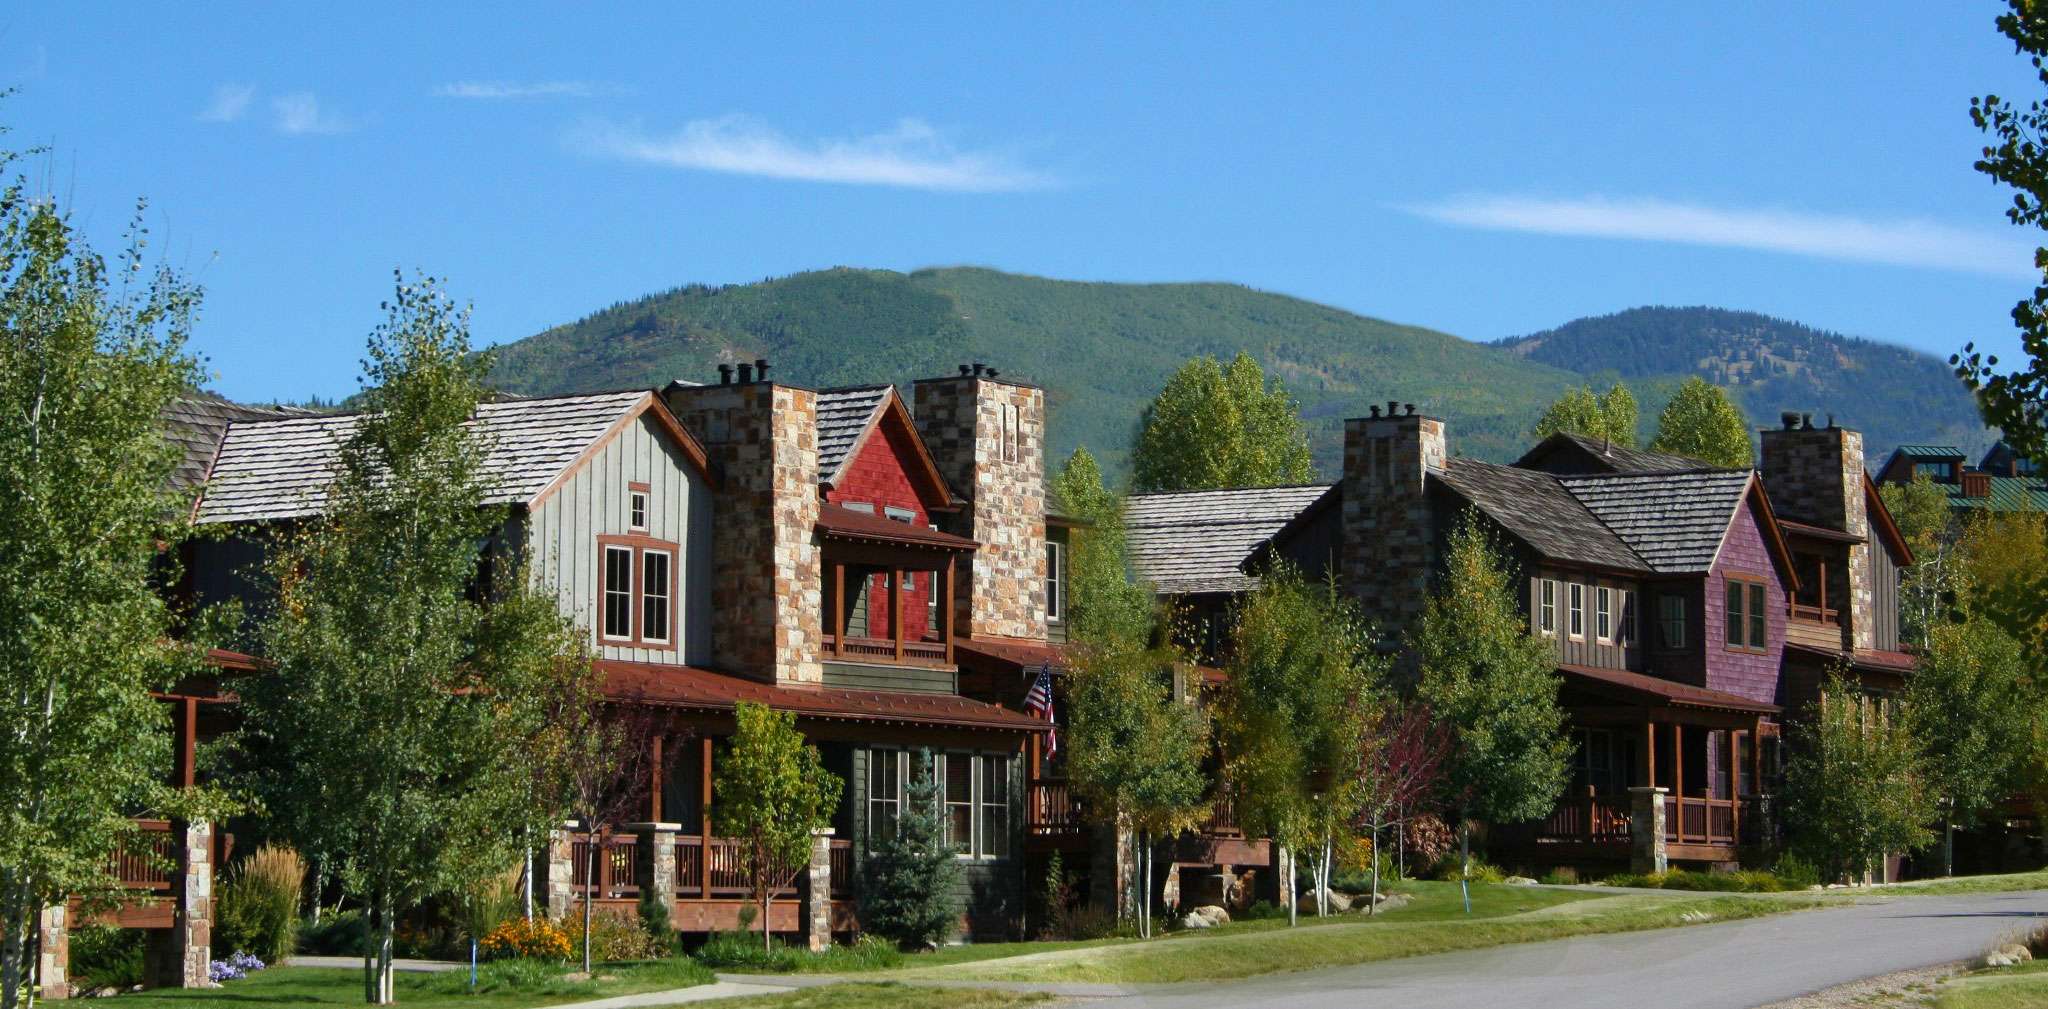 Vacation Homes Steamboat Springs: A List Of The Top ...